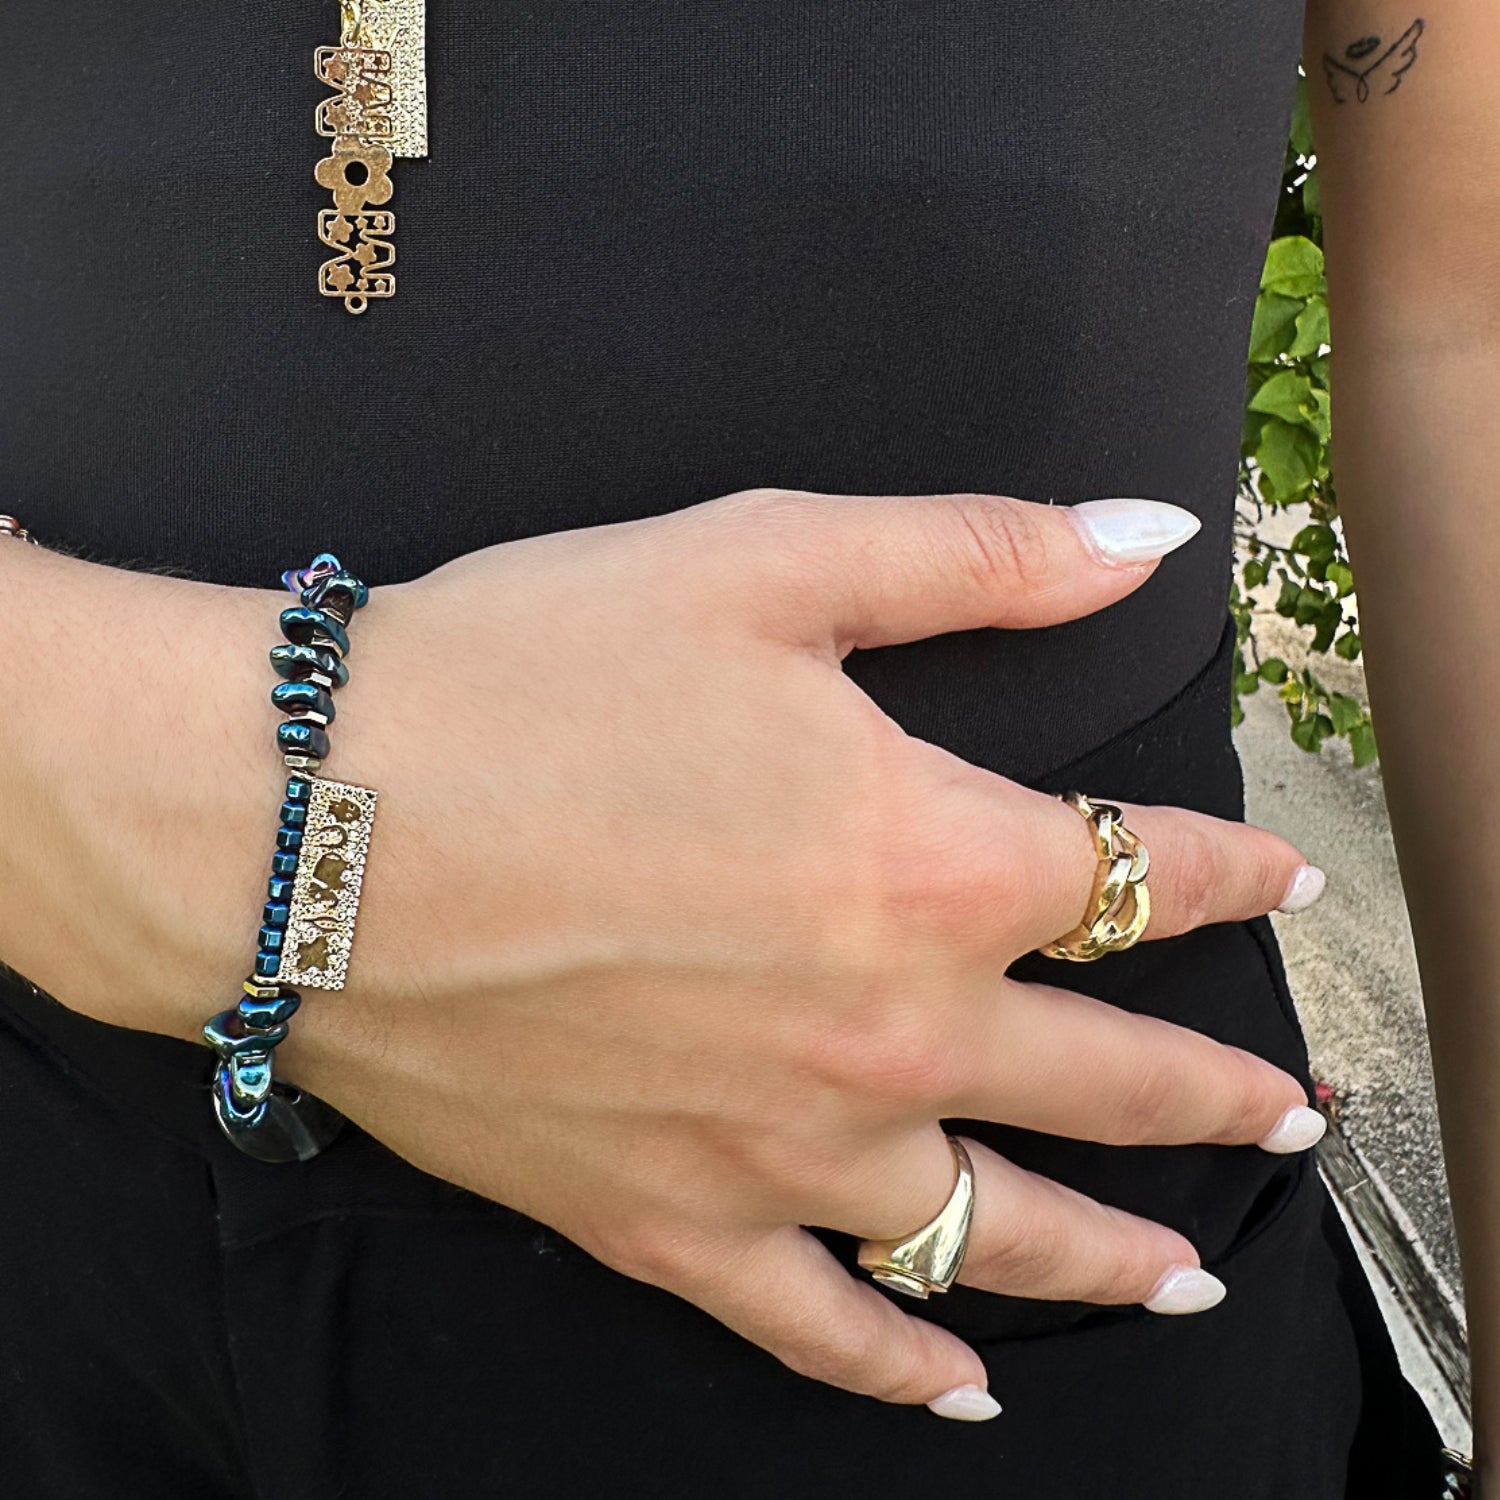 See how the Protection & Luck Blue Hematite Bracelet adorns the hand model's wrist, combining style and spiritual significance.